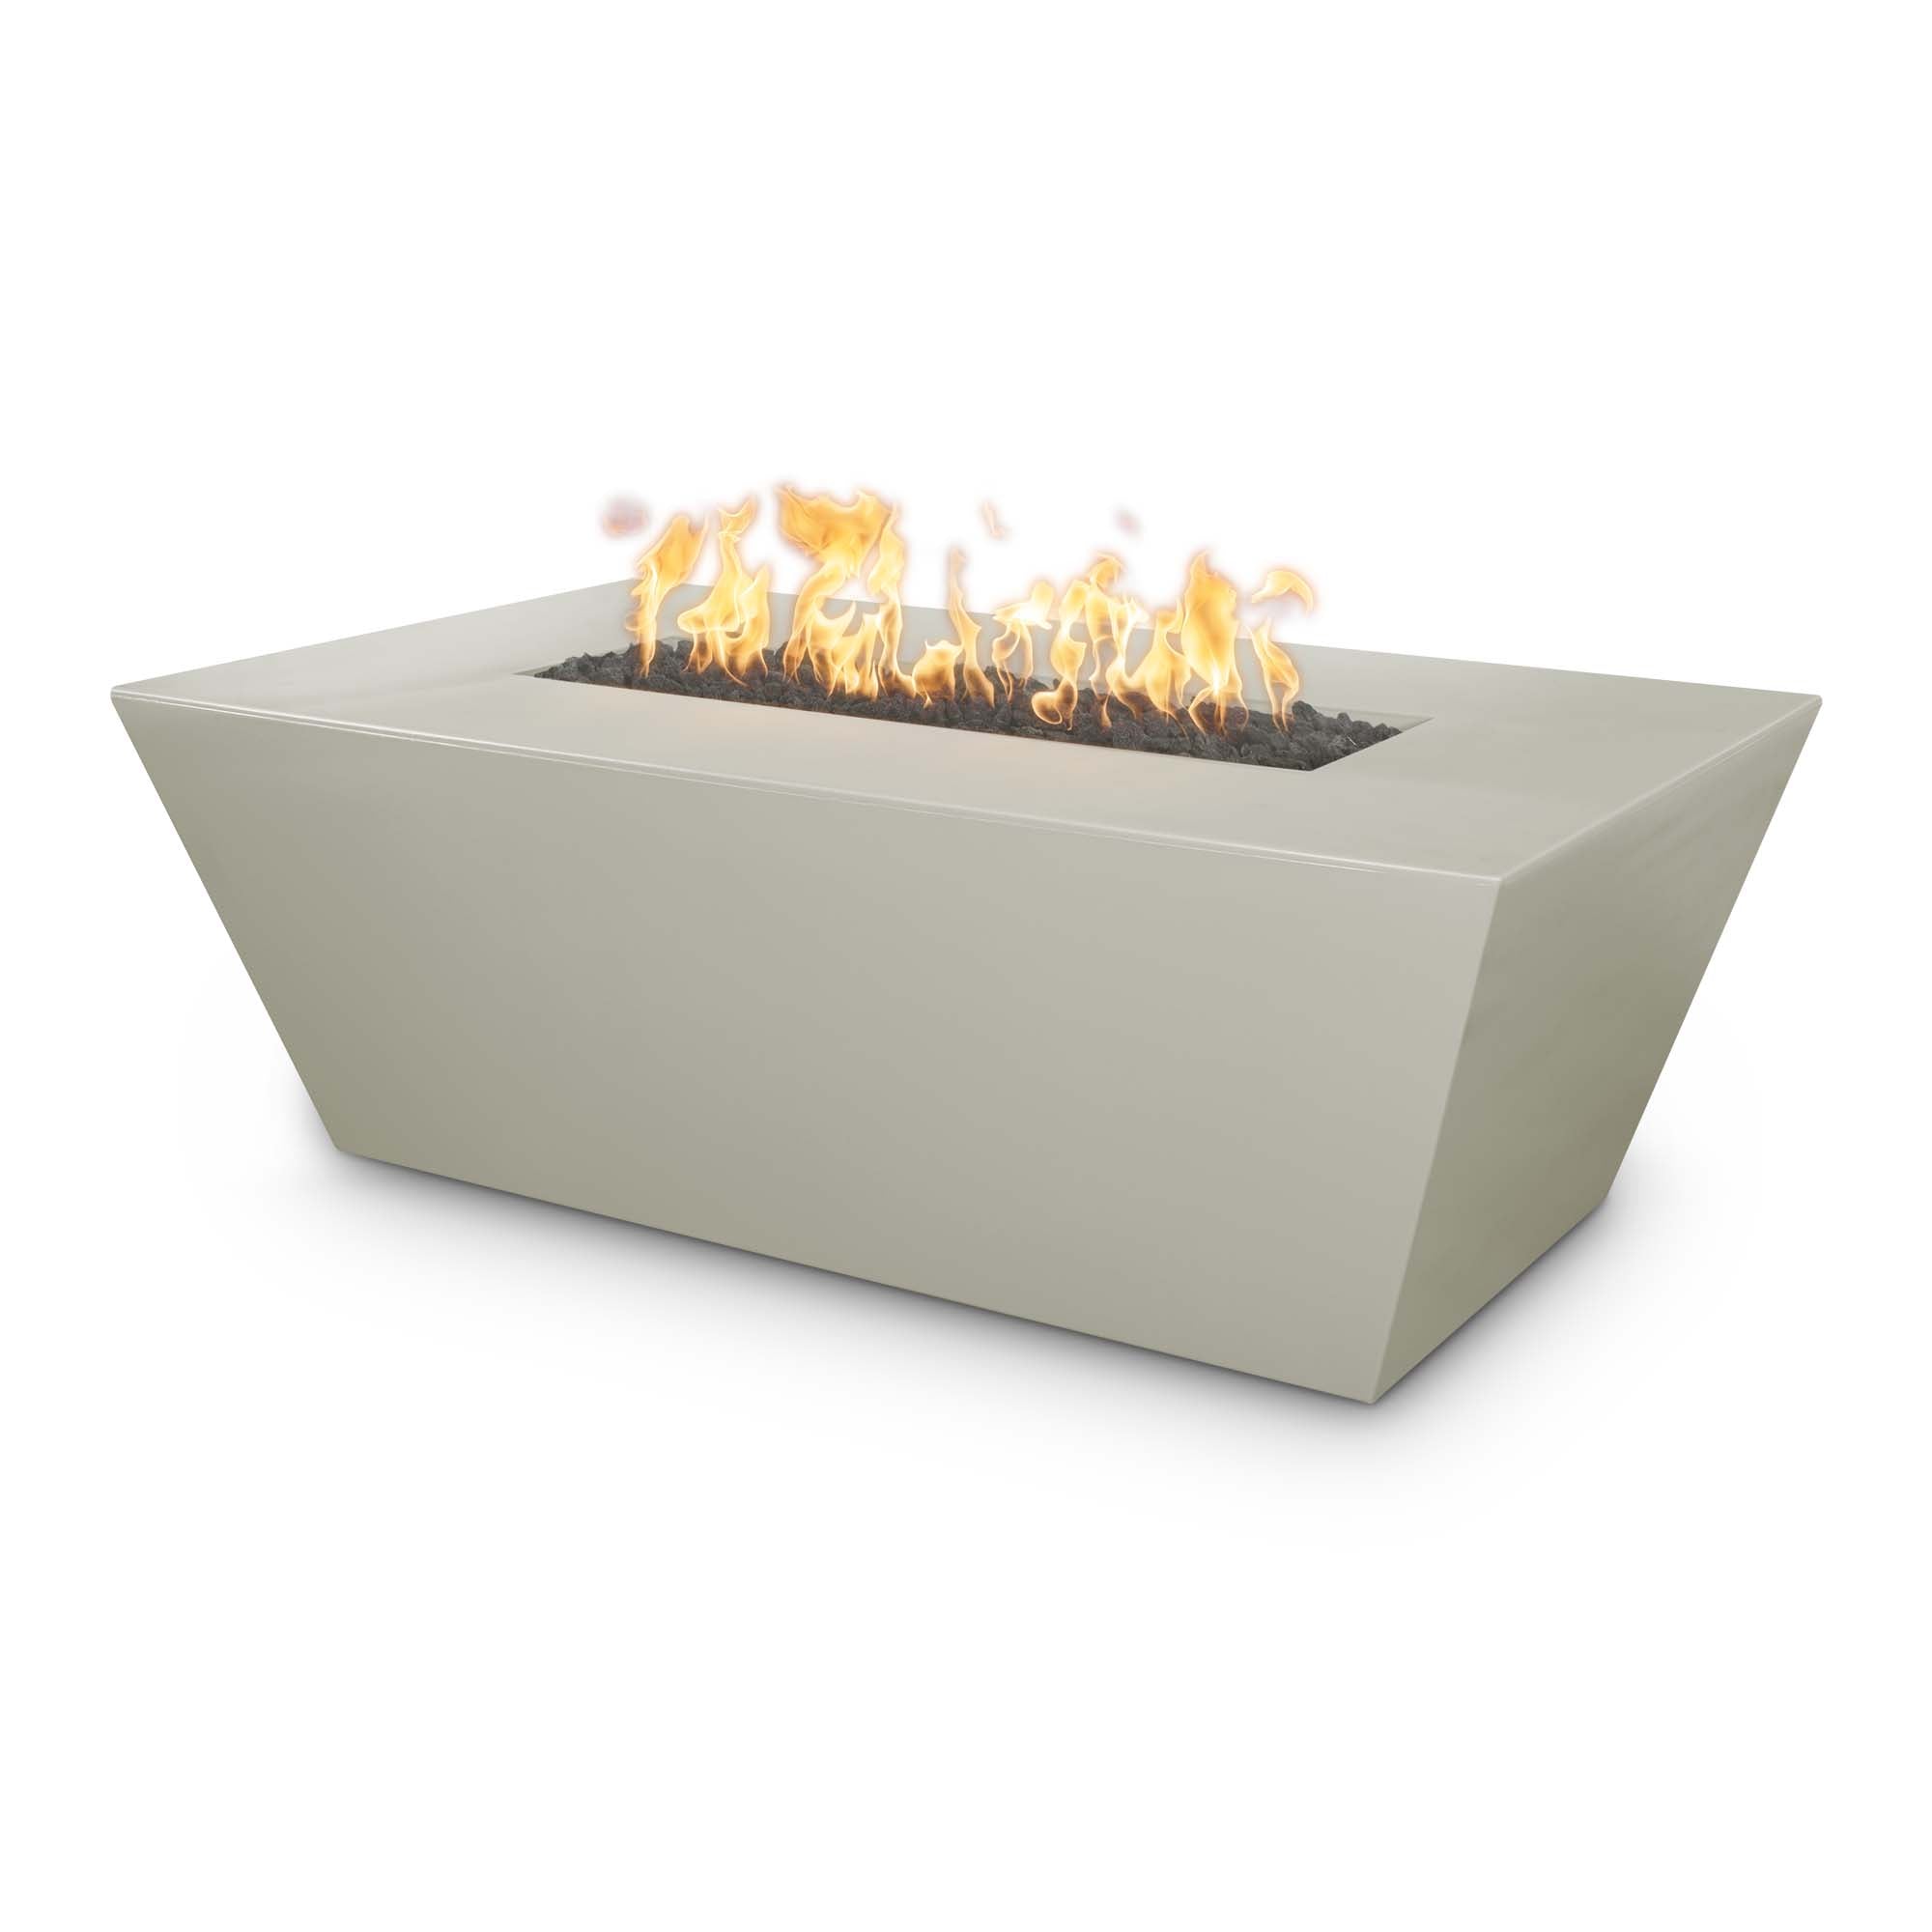 The Outdoor Plus Fire Pit 60" x 36" / Plug & Play Electronic Ignition The Outdoor Plus Angelus Fire Pit | Concrete OPT-AGLGF60EKIT